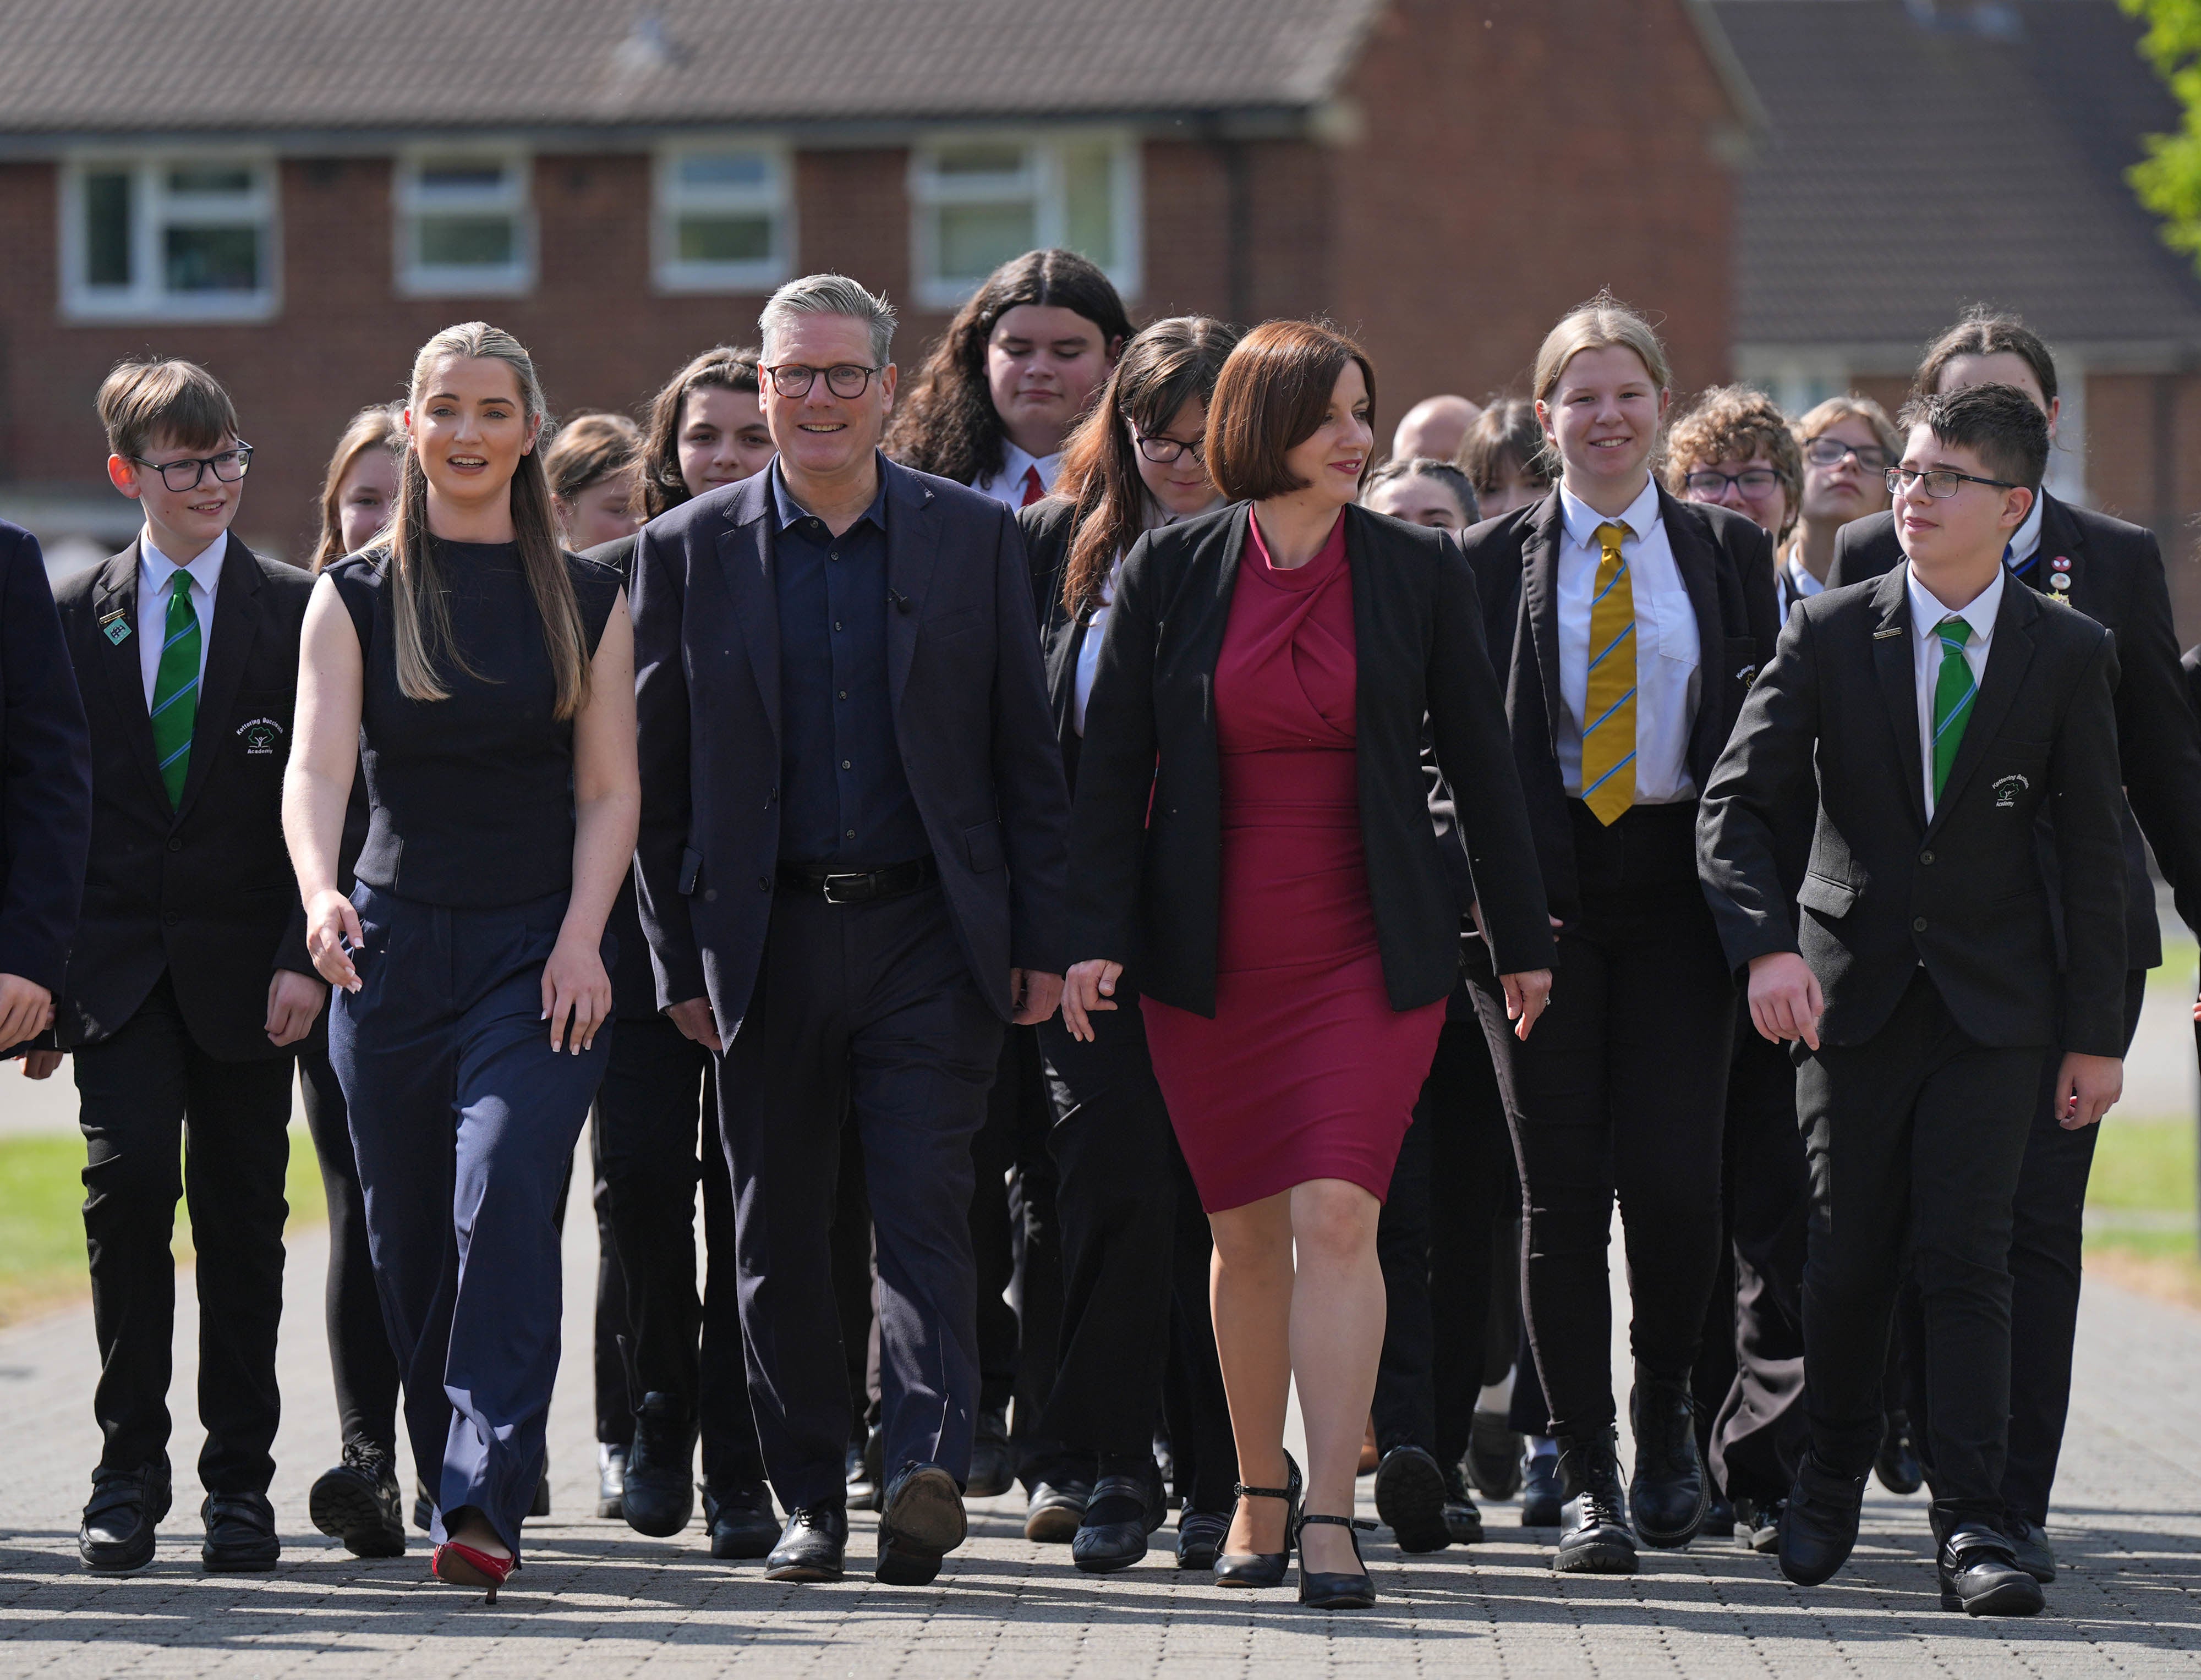 Labour Party leader Keir Starmer (centre) and shadow education secretary Bridget Phillipson (centre right) walk with pupils during a visit to a school in Northamptonshire